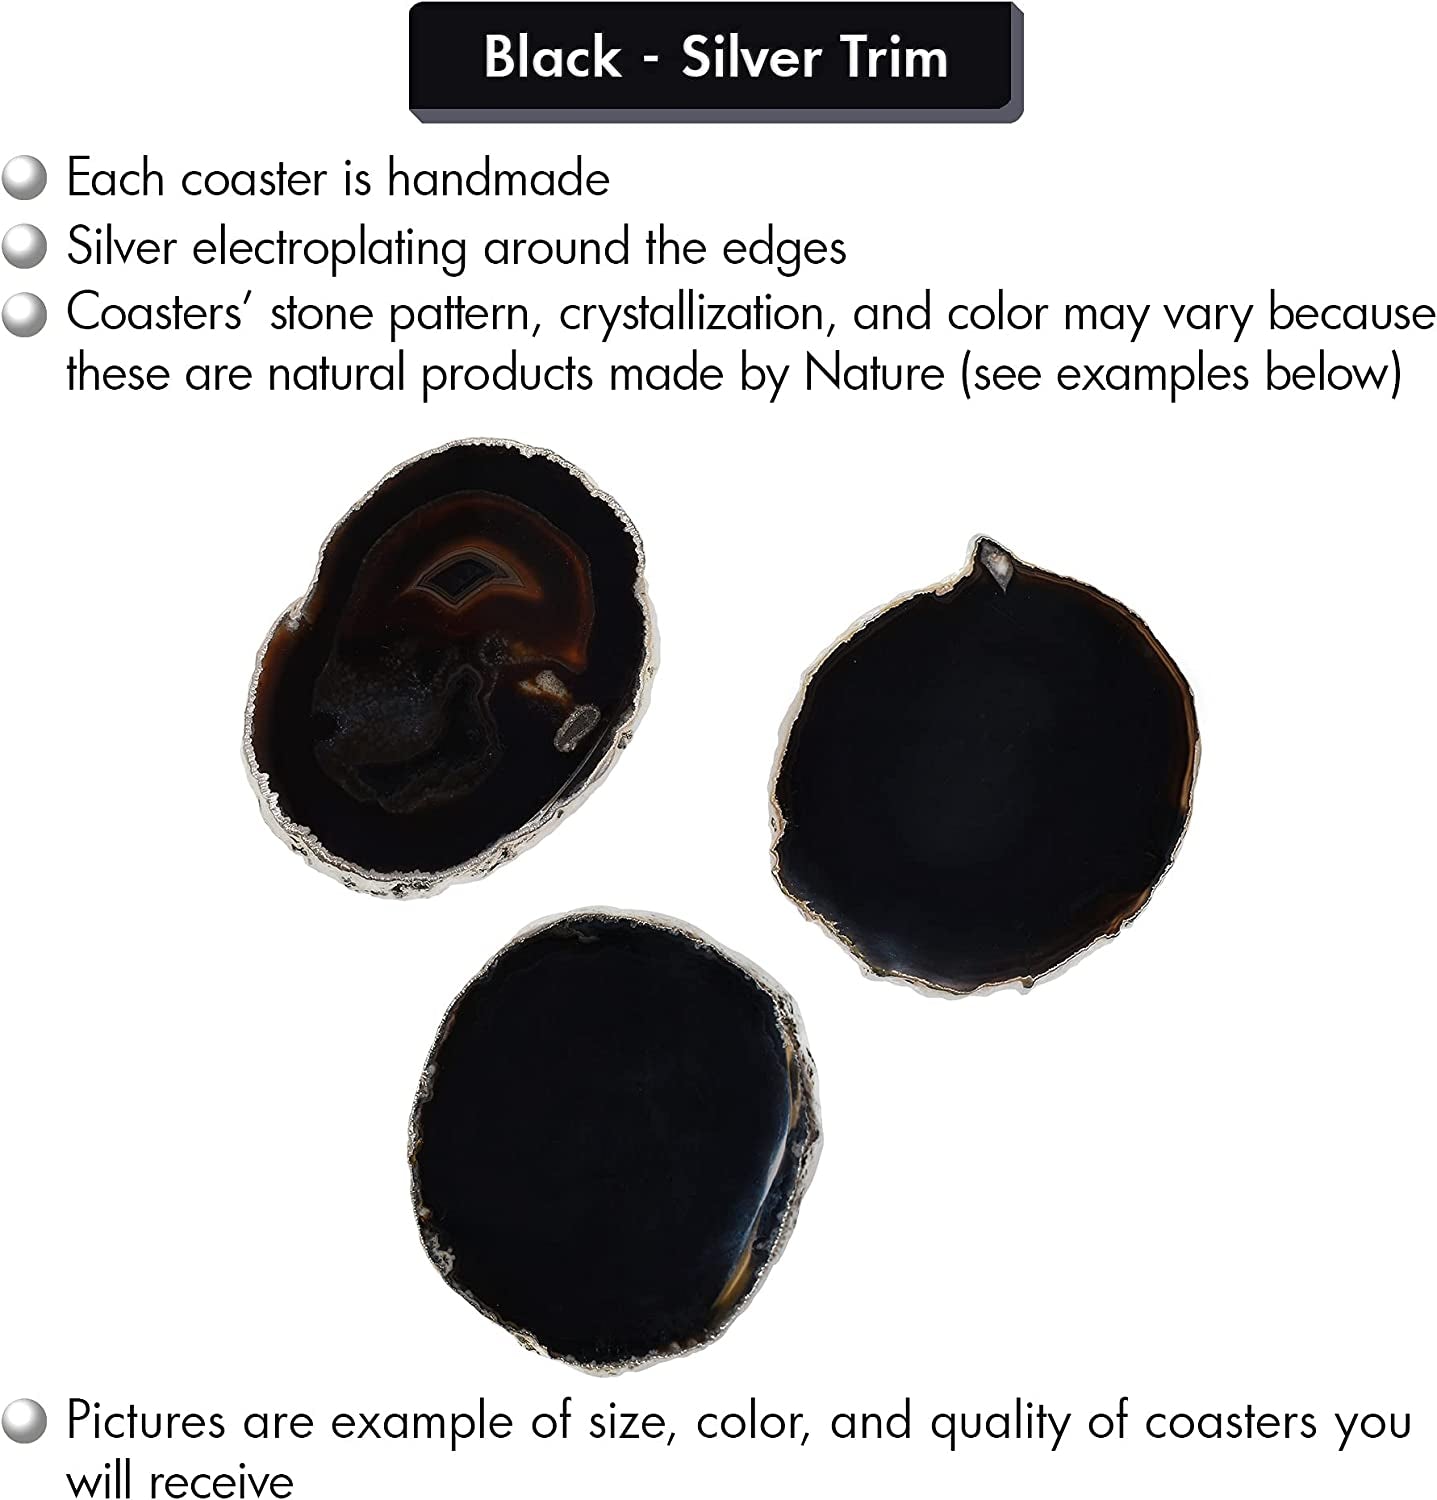 Premium Black Silver Rimmed Agate Coasters - Set of 4, Genuine Stone Table Mats for Dining & Drinks Coffee Table & Kitchen Geode Decor Non-Toxic 3.5-4” Diameter